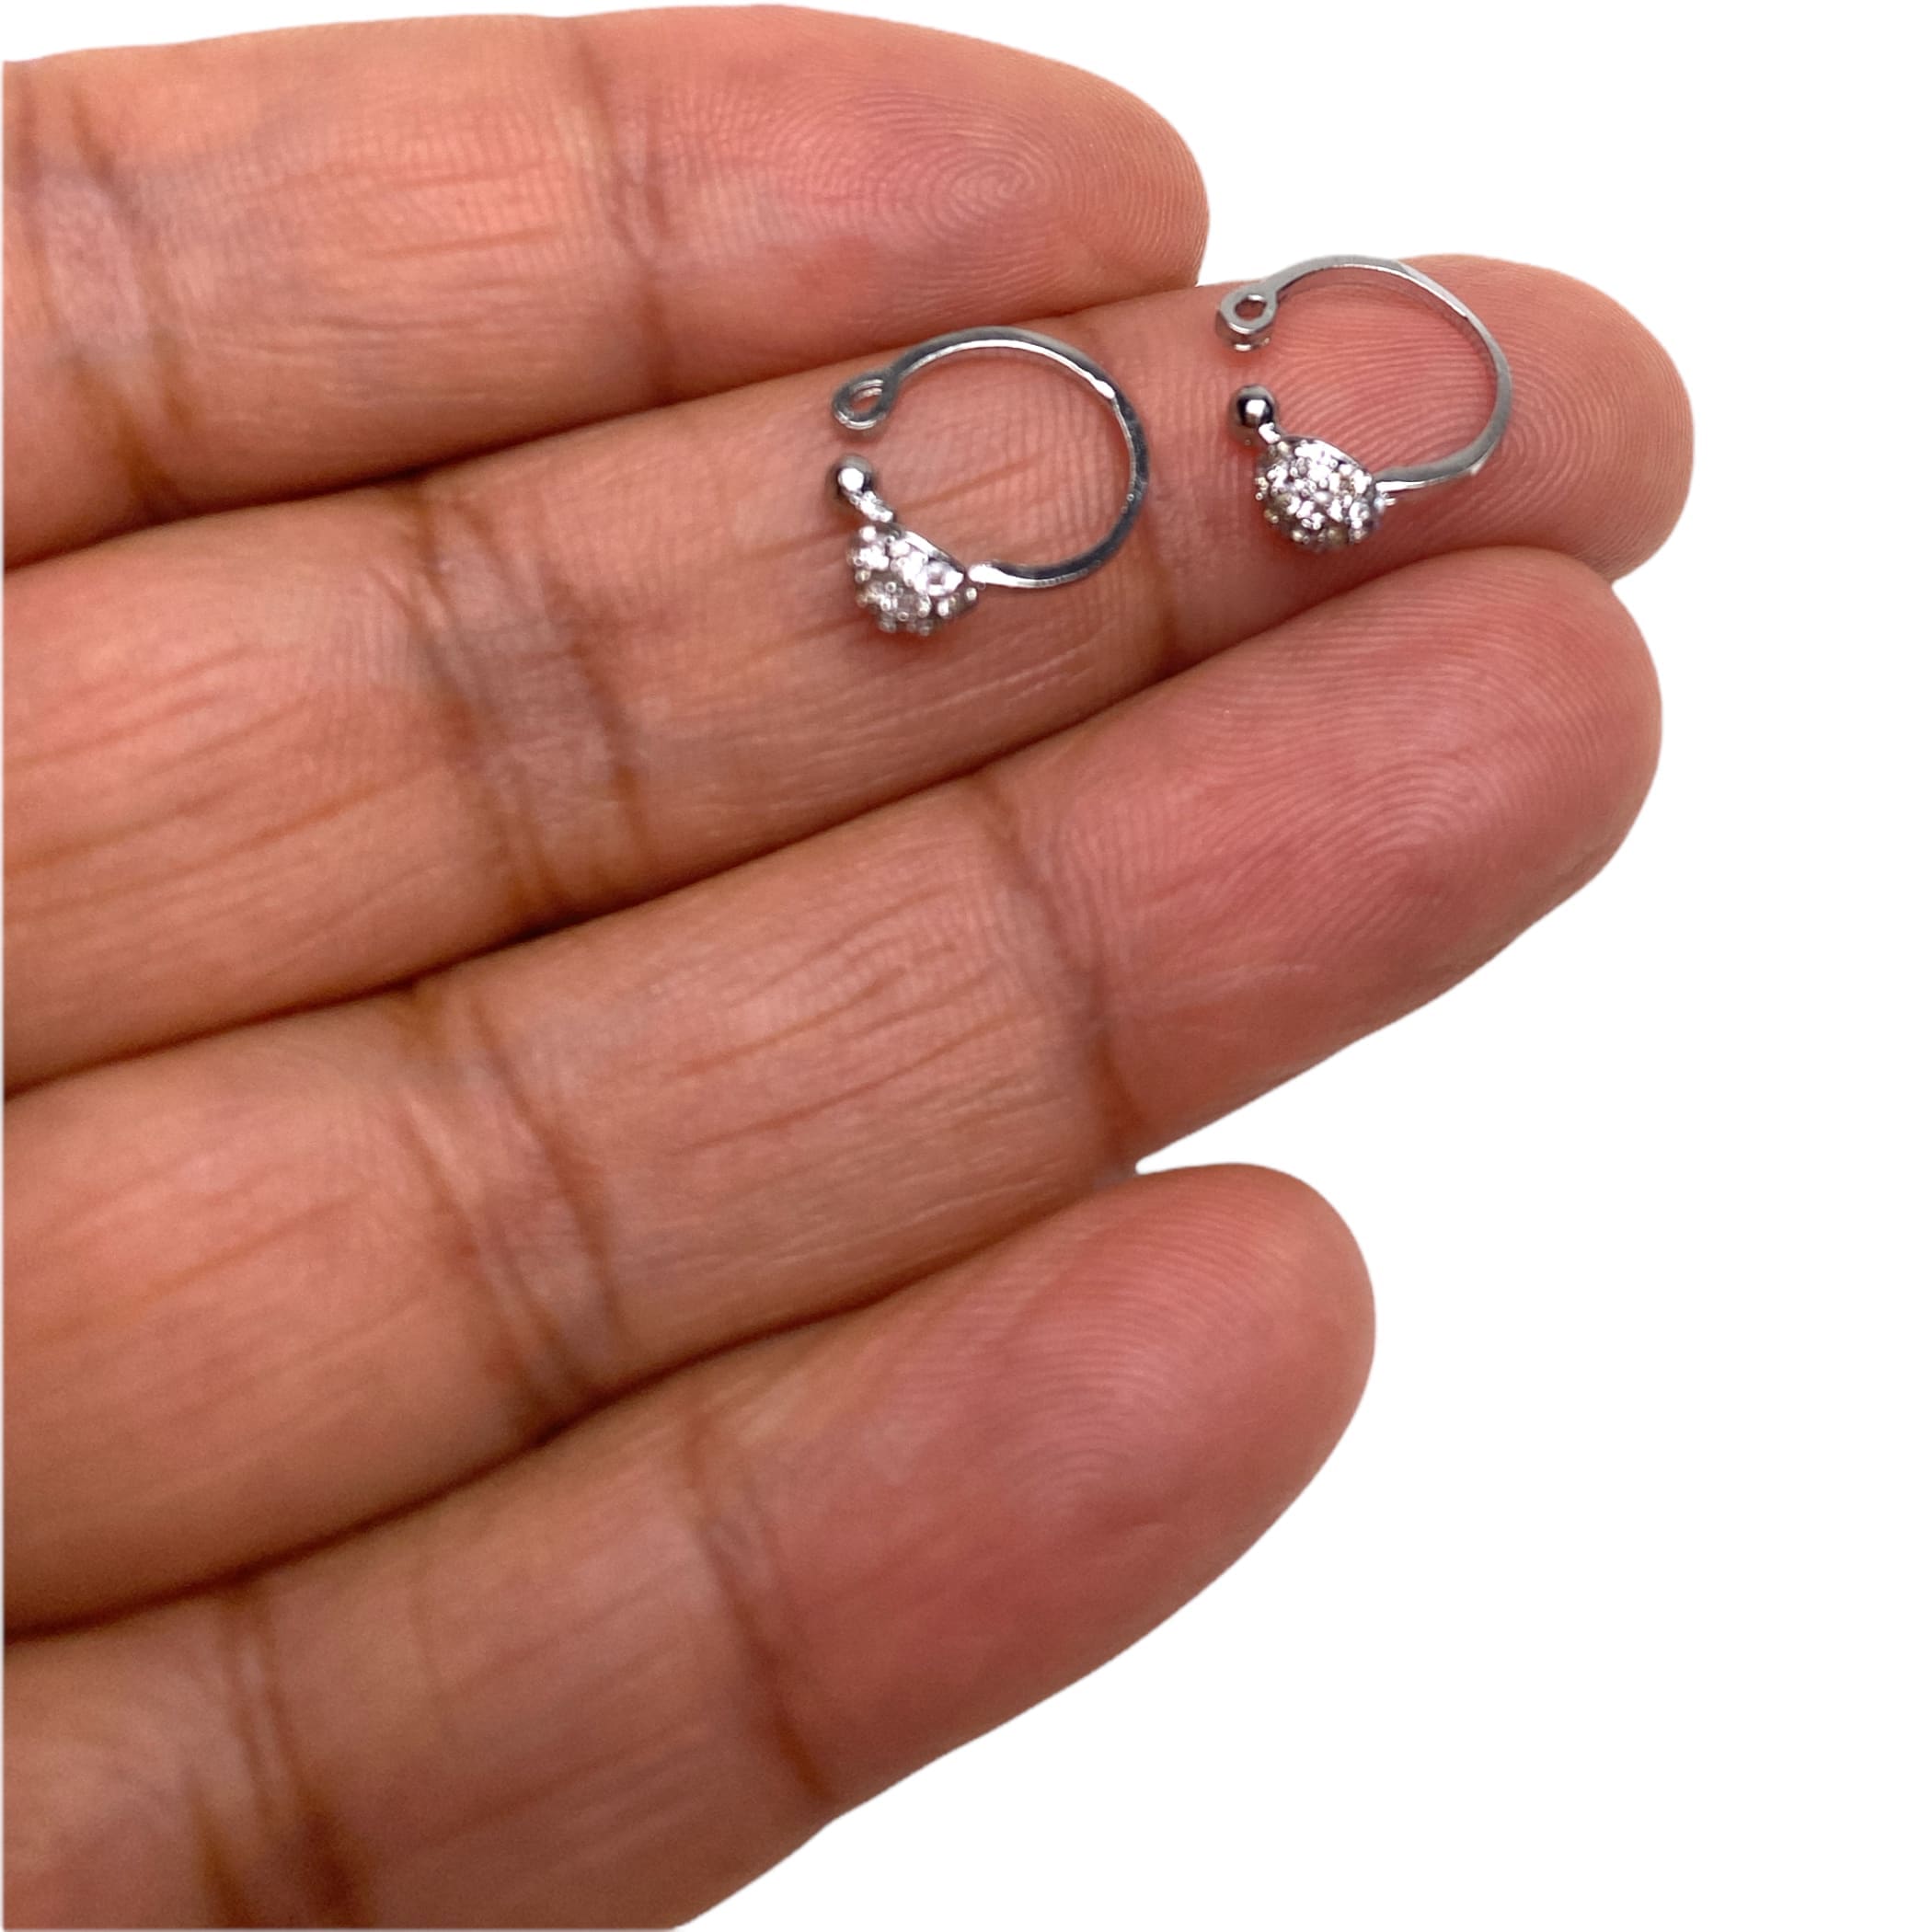 Cz delicate nose ring with rhodium plating for women